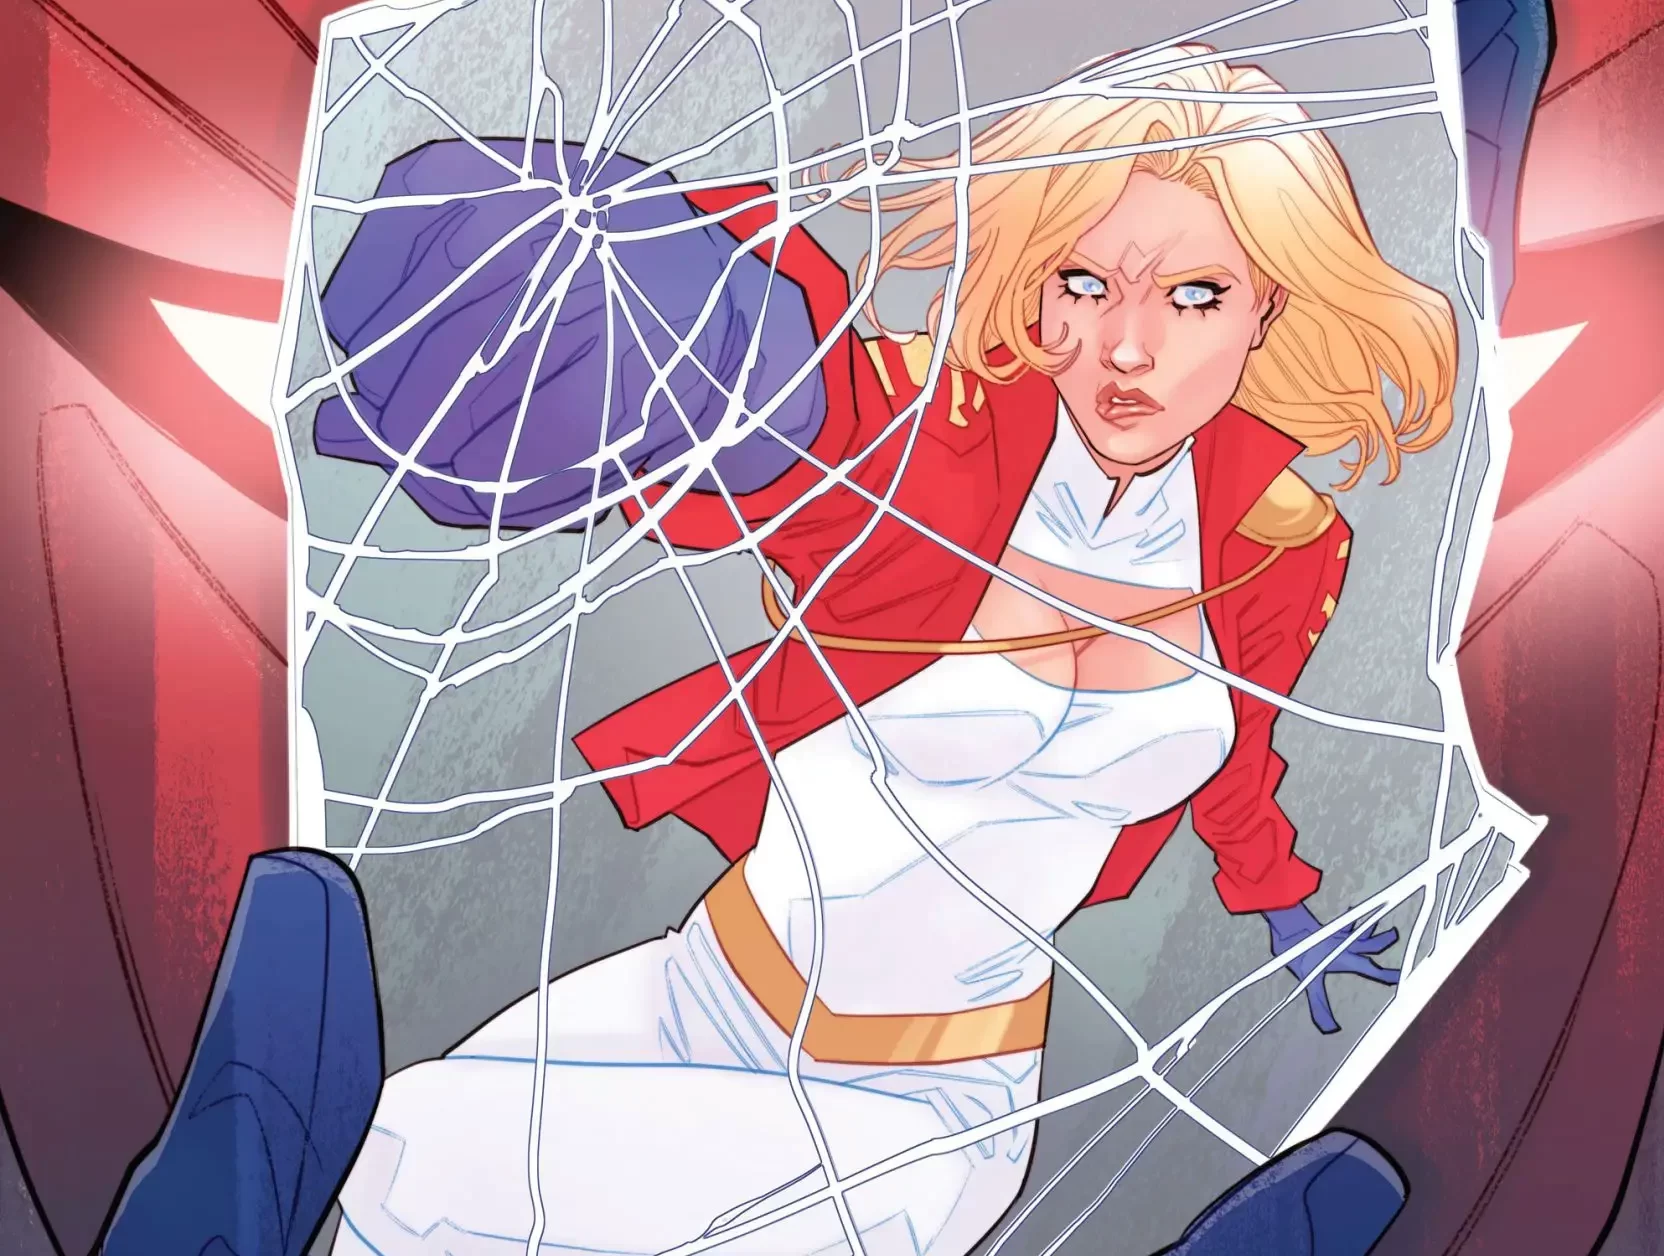 ‘Power Girl Special’ #1 is an apocalypse of the heart and mind